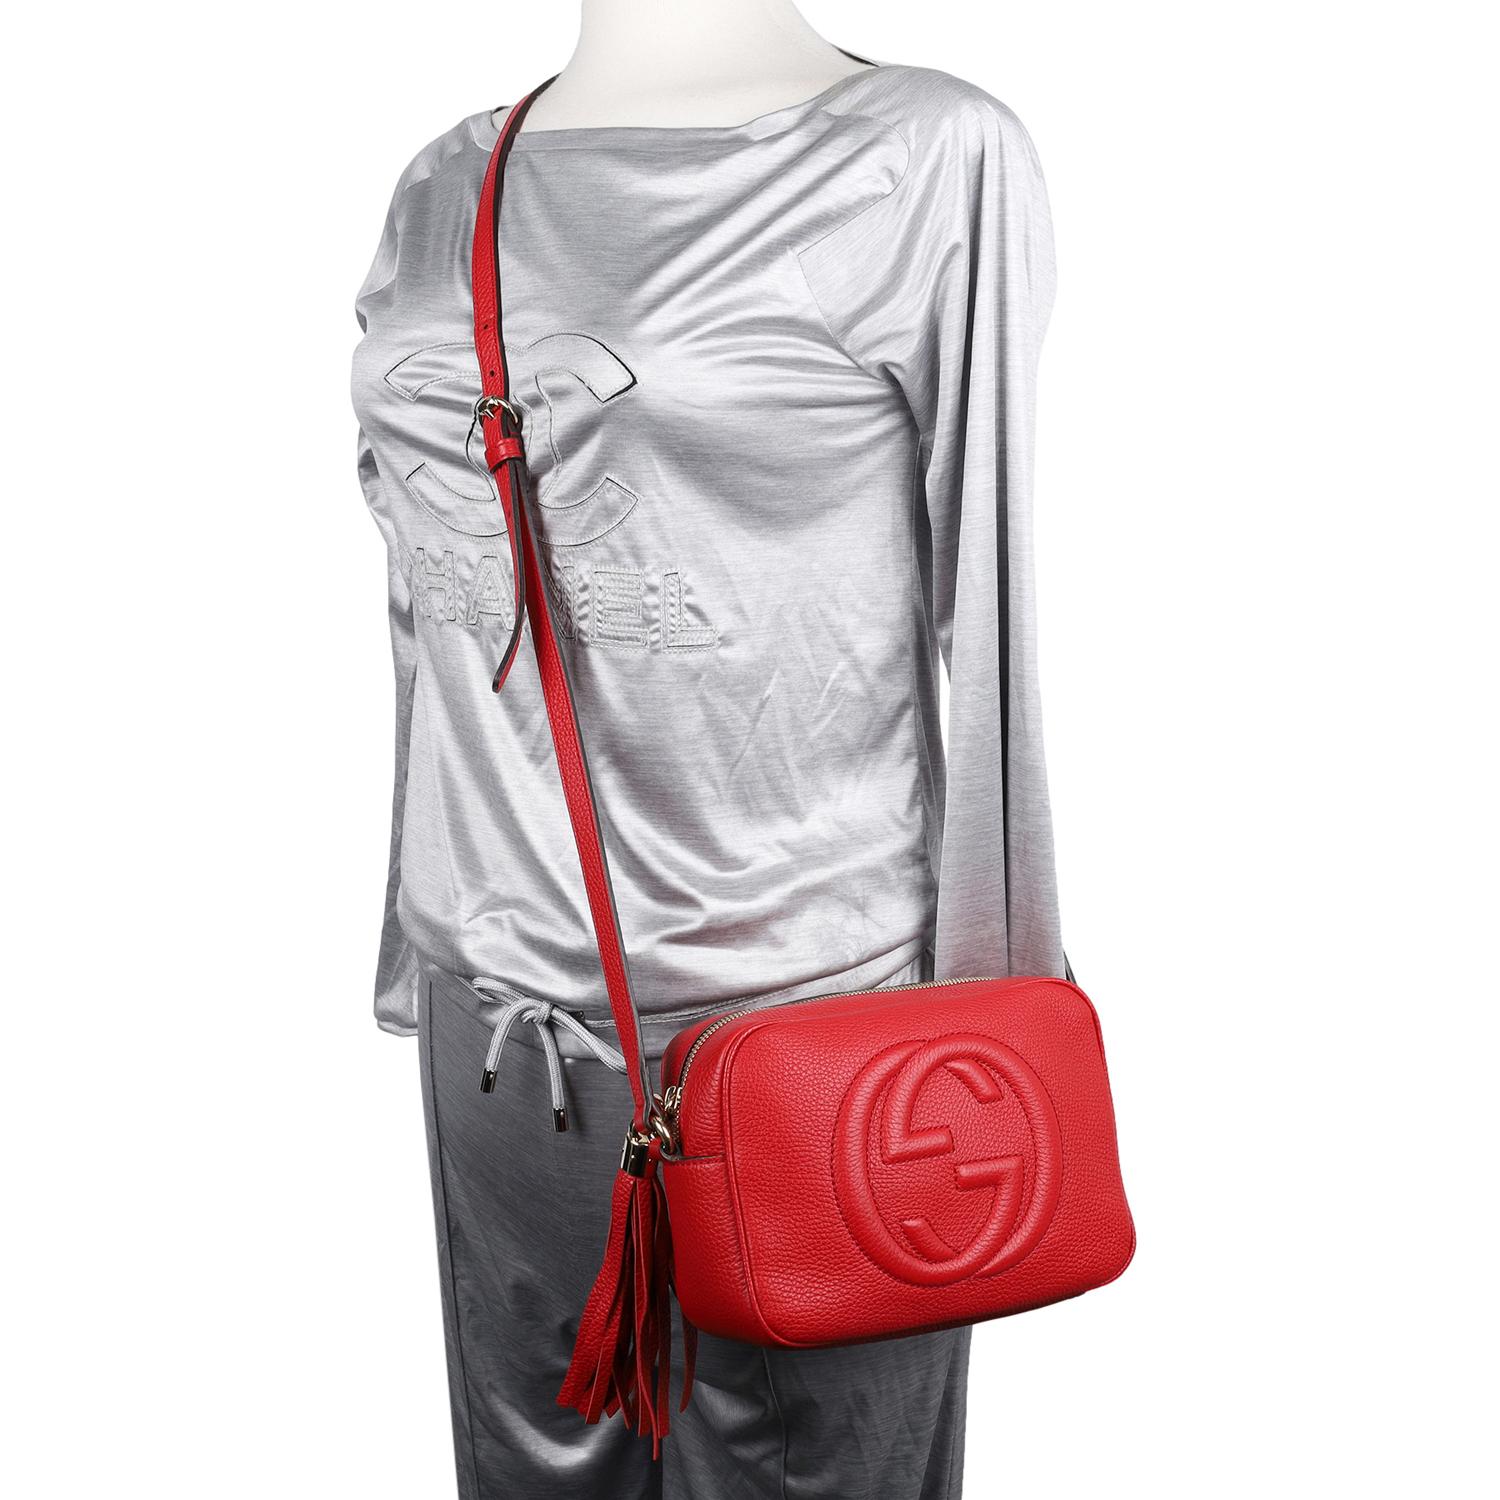 Authentic, pre-owned Gucci GG Red Soho Disco leather cross body bag. This classic Gucci red leather cross body bag makes a perfect everyday bag. Features GG logo on the front, zipper top closure with fringe pull tab, roomy interior with 2 slip